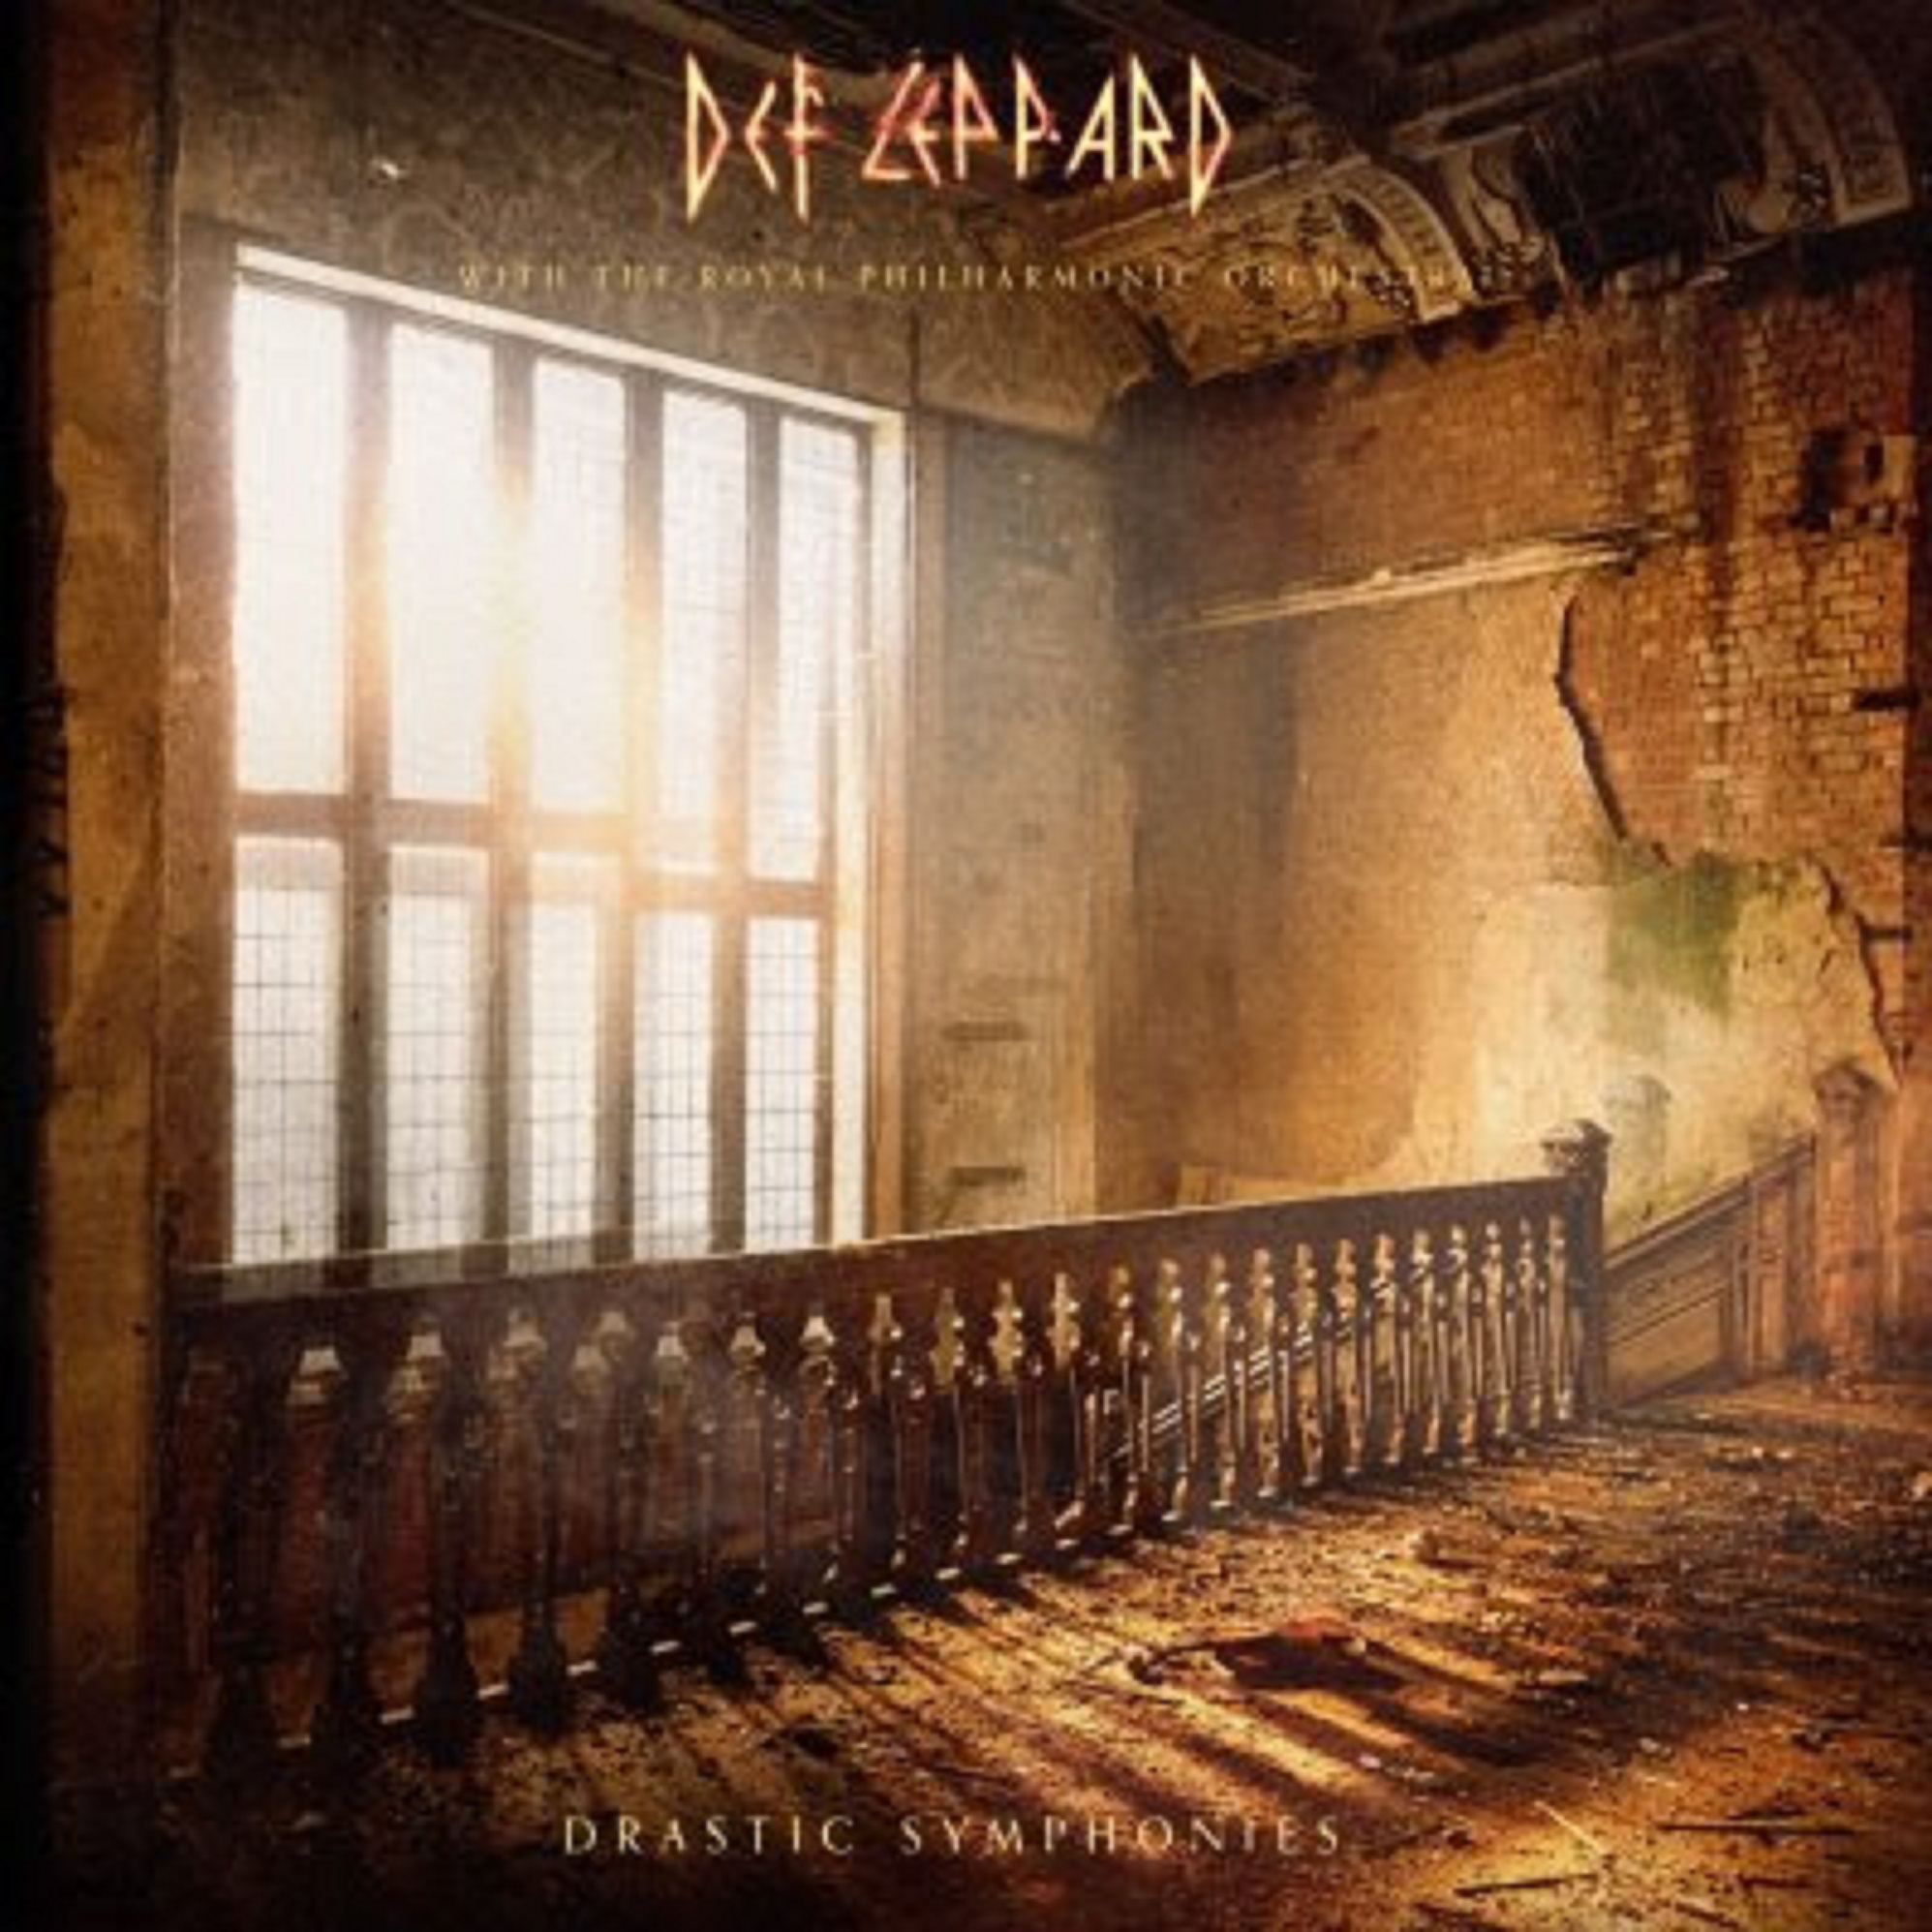 Def Leppard With The Royal Philharmonic Orchestra - New Album –‘Drastic Symphonies’